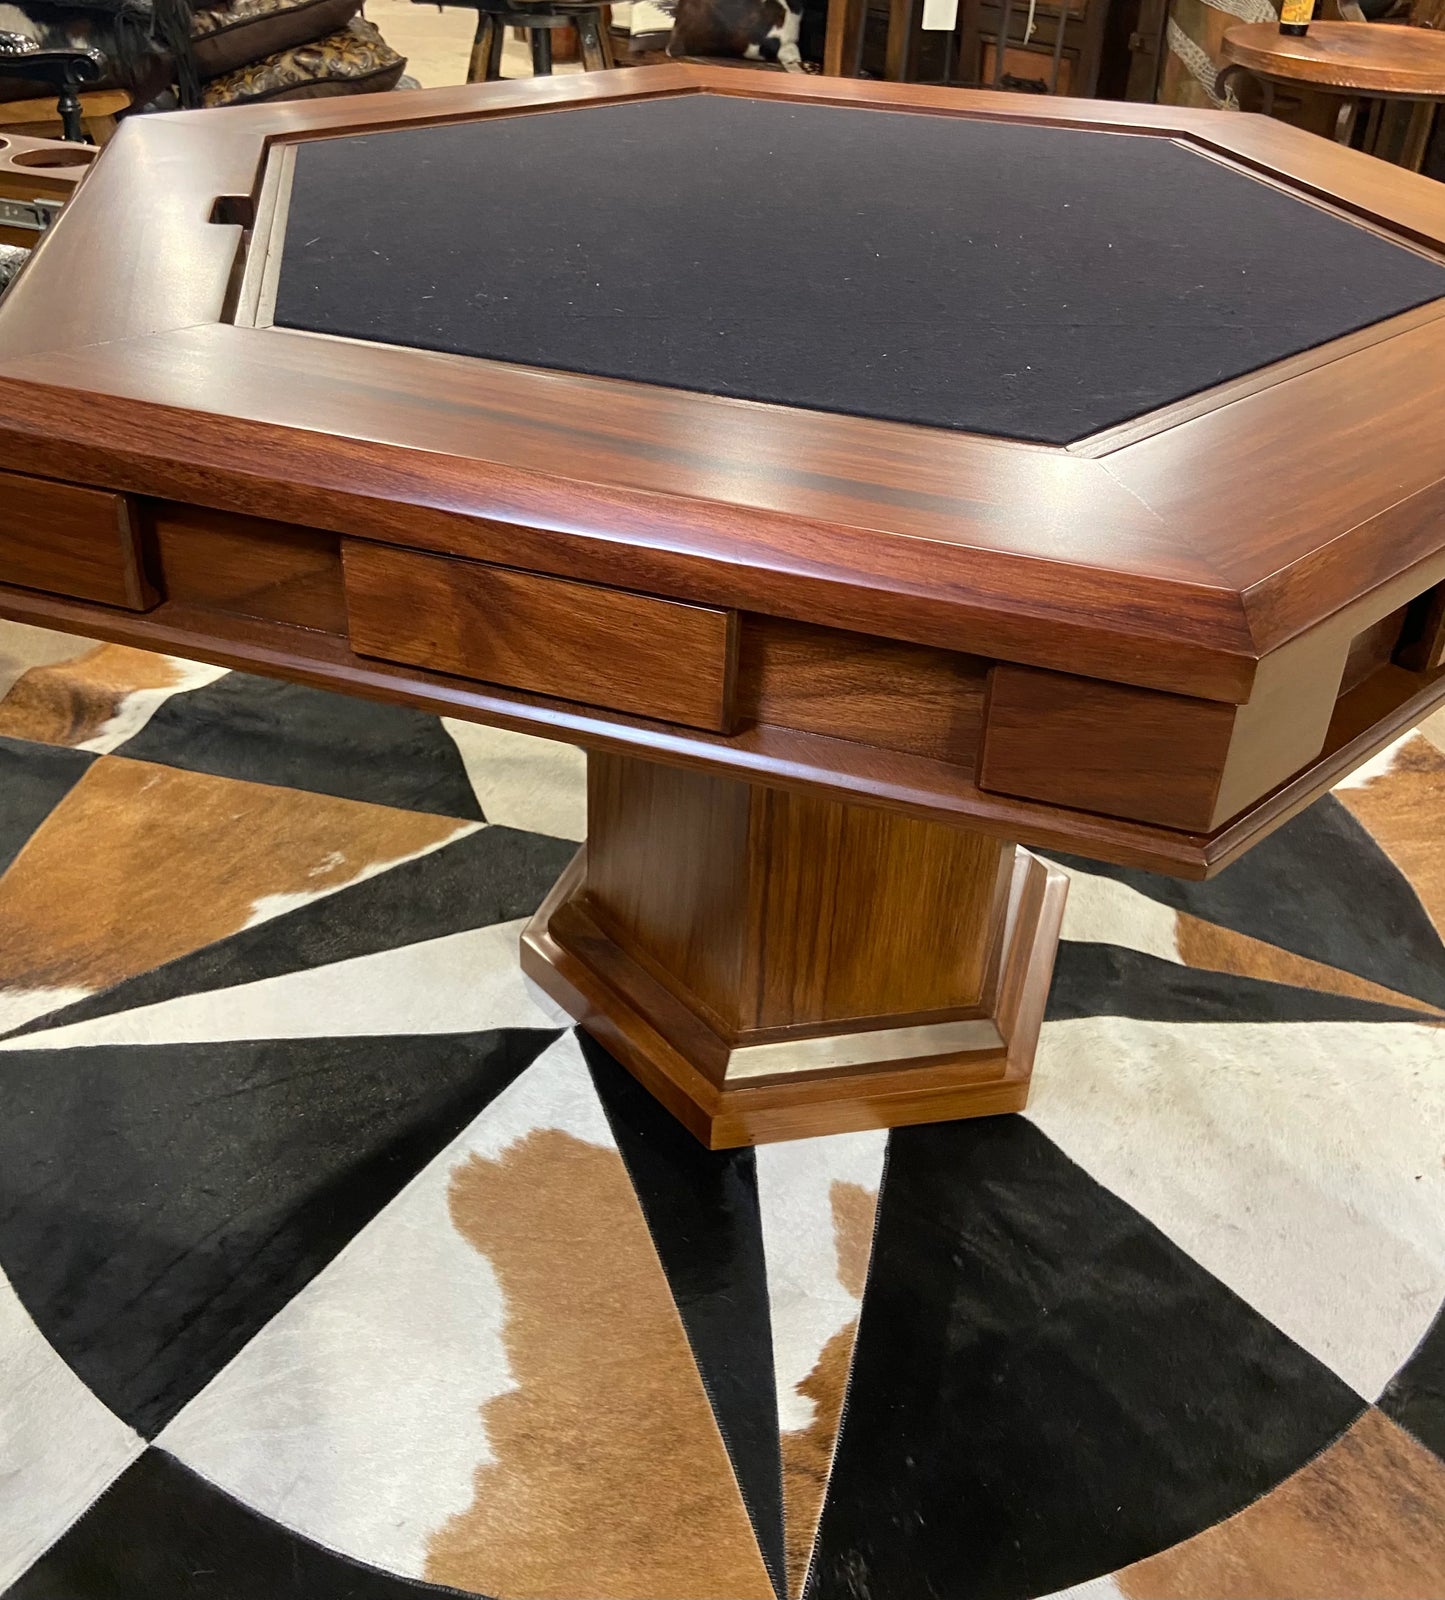 The Artisan crafted solid wood poker table